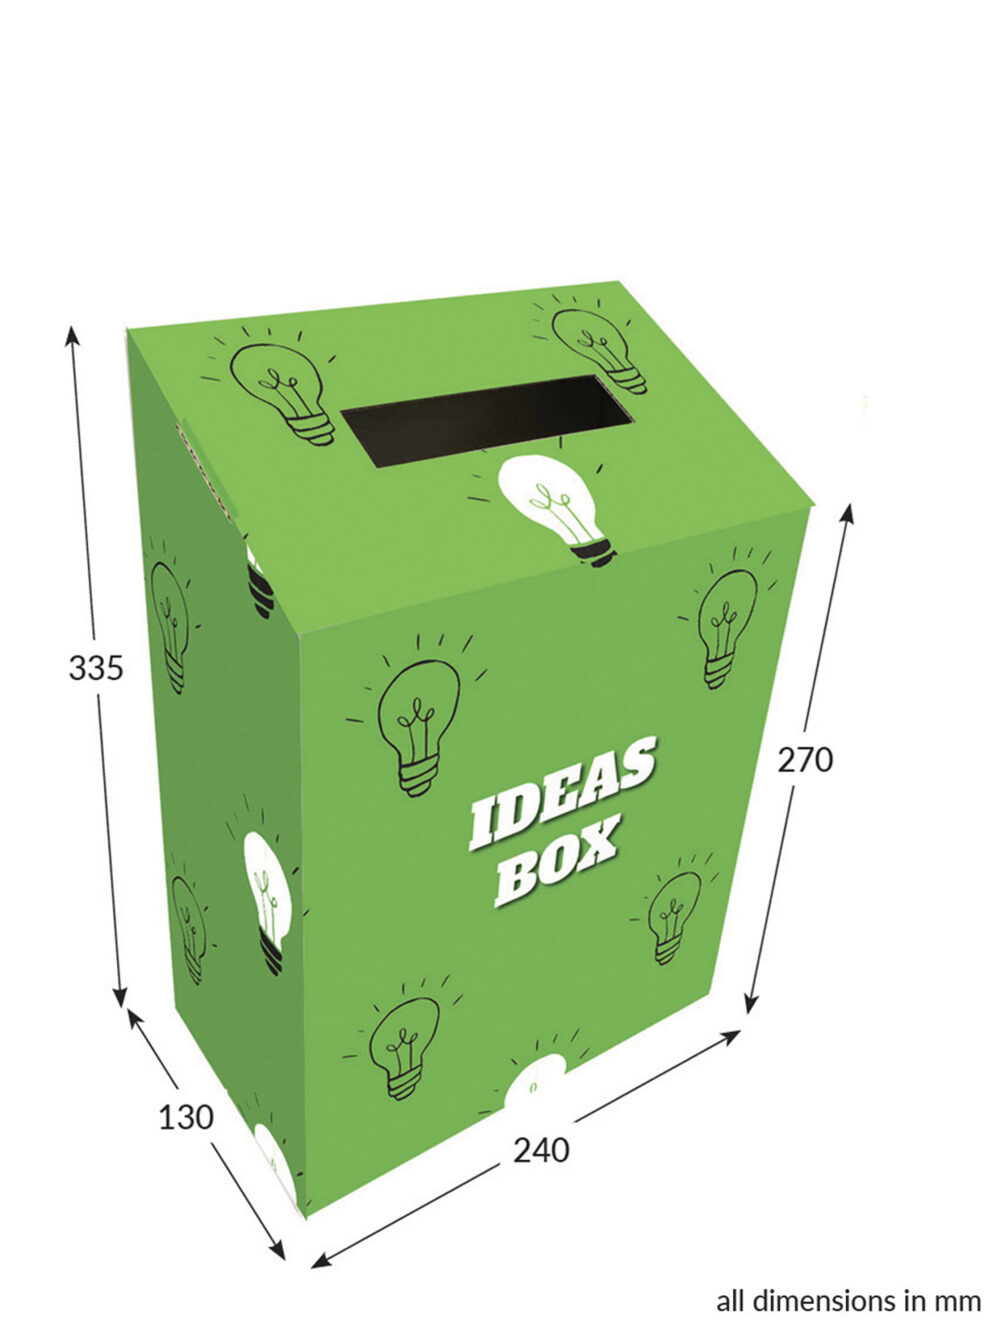 Featured image for “Ballot Box Large Angled Top - Ideas Box”